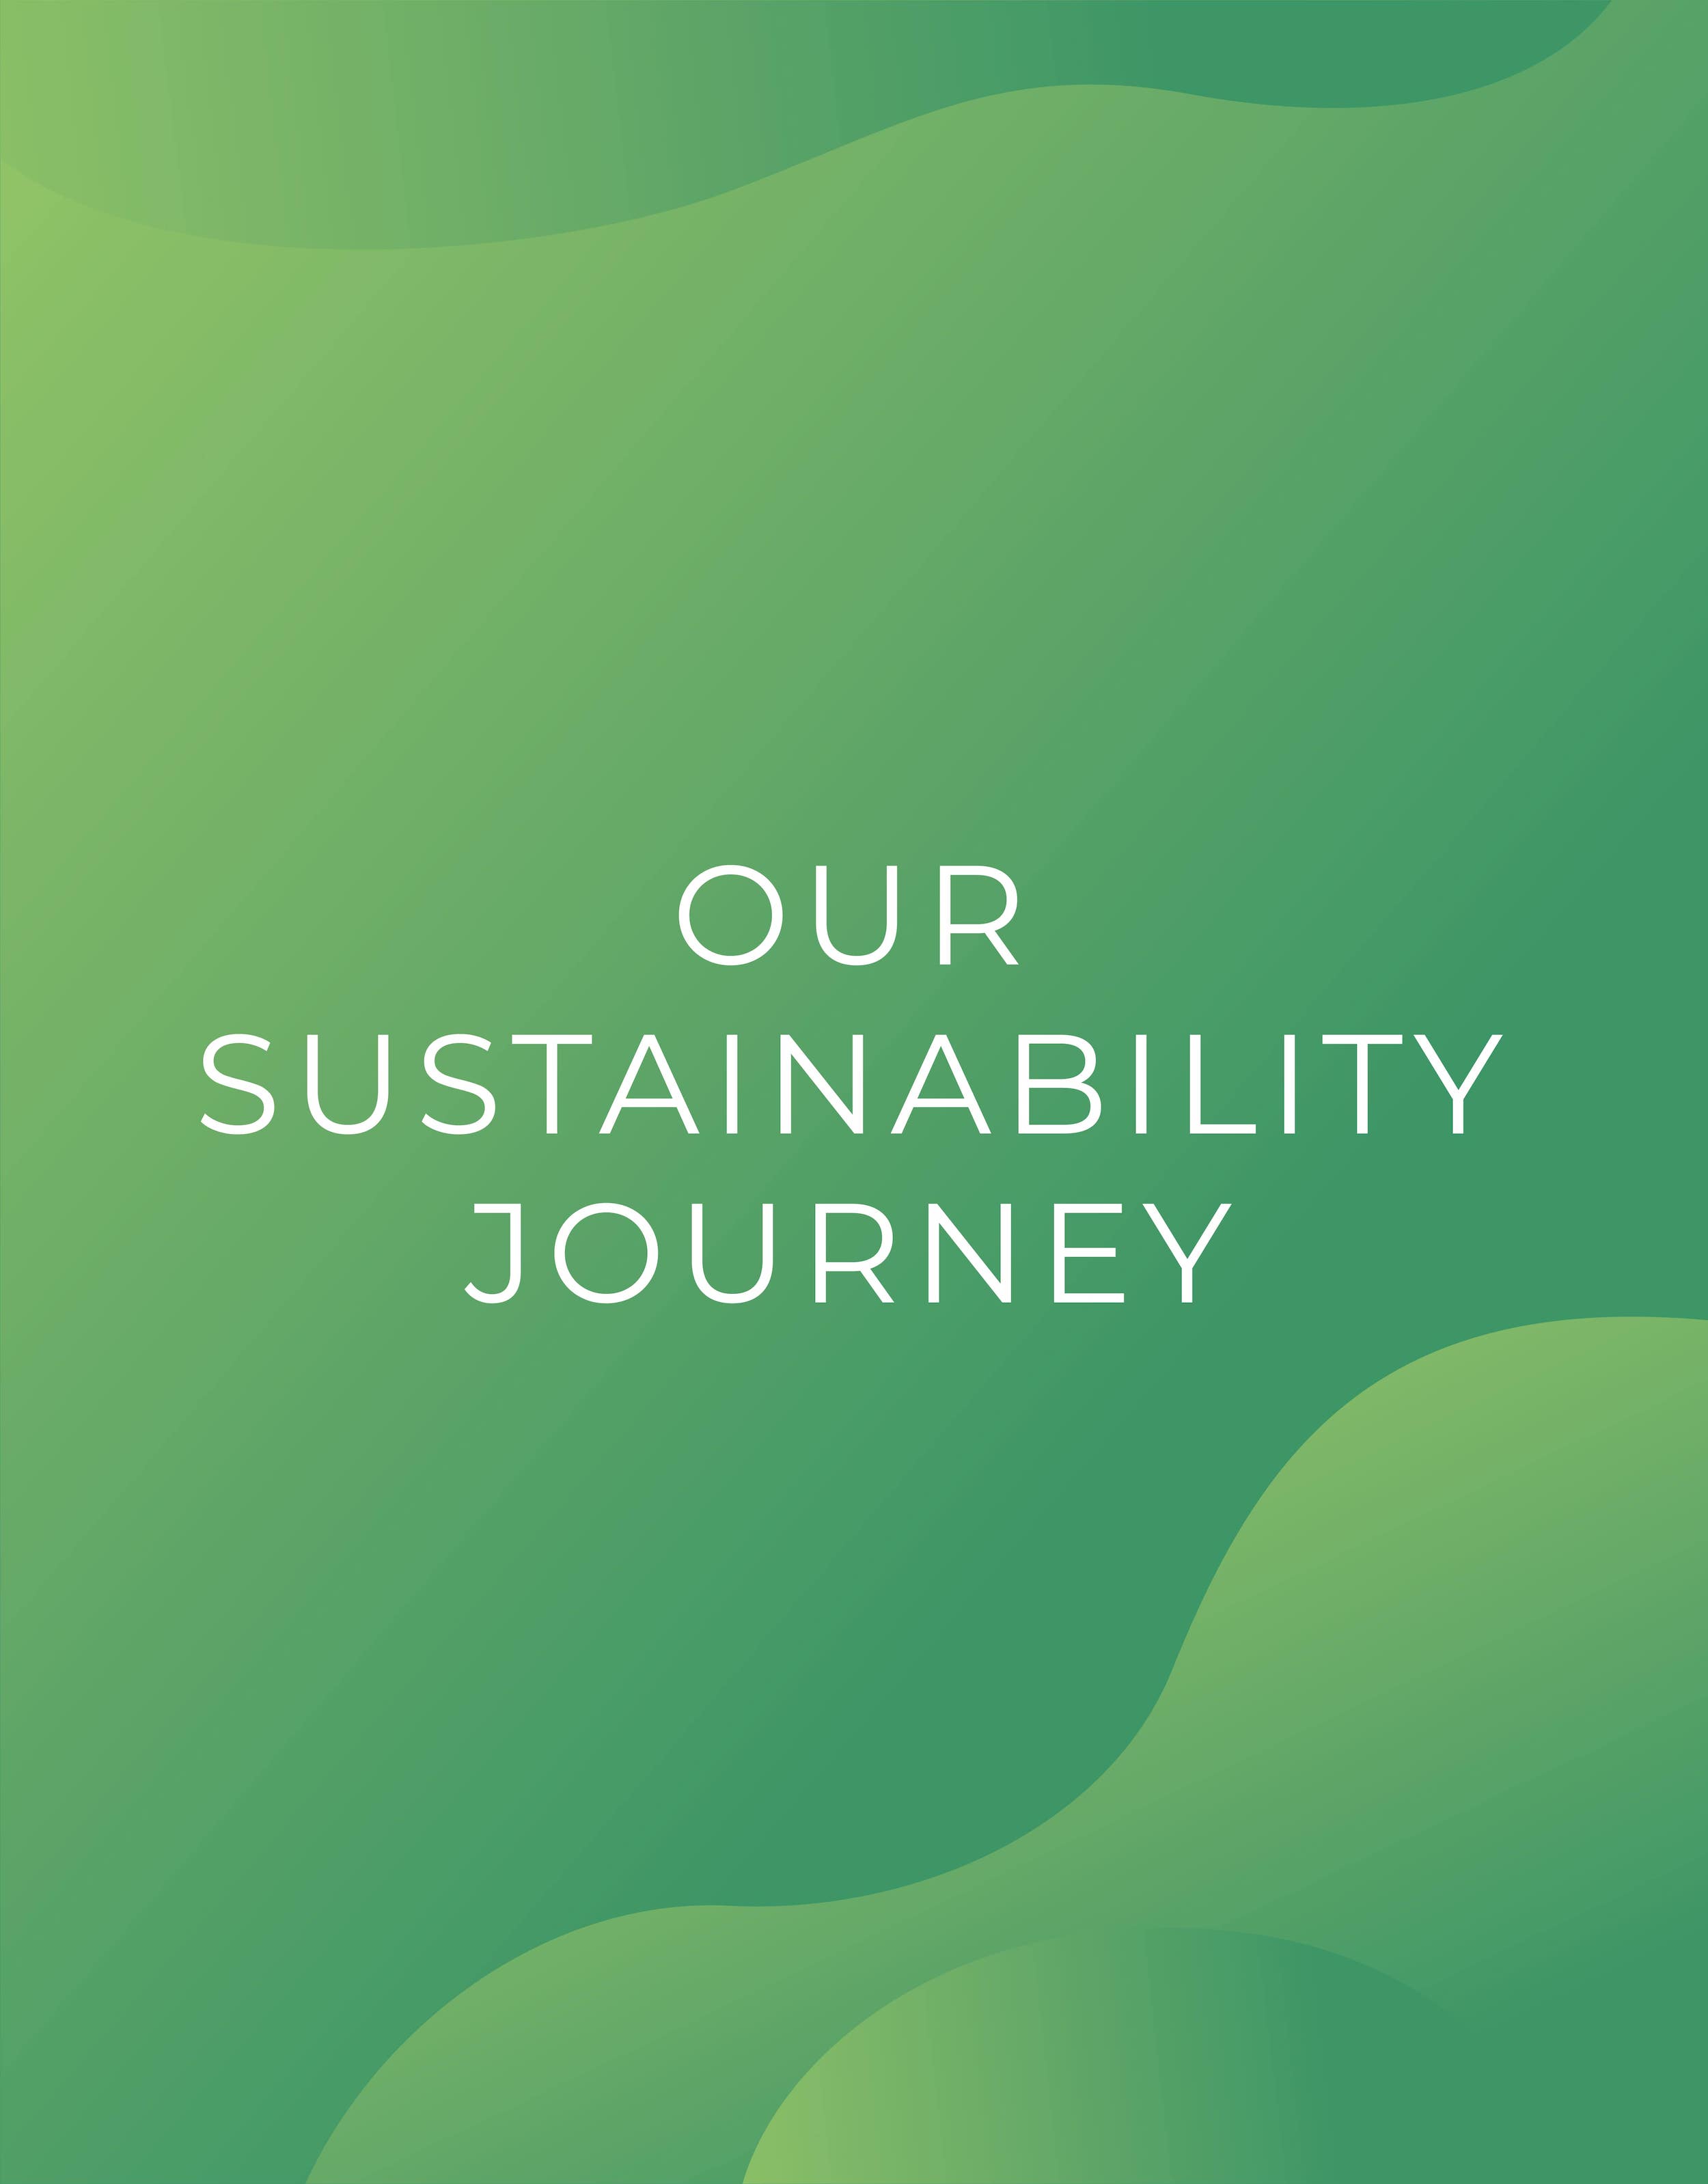 Our_Sustainability_Journey-02-min.jpg